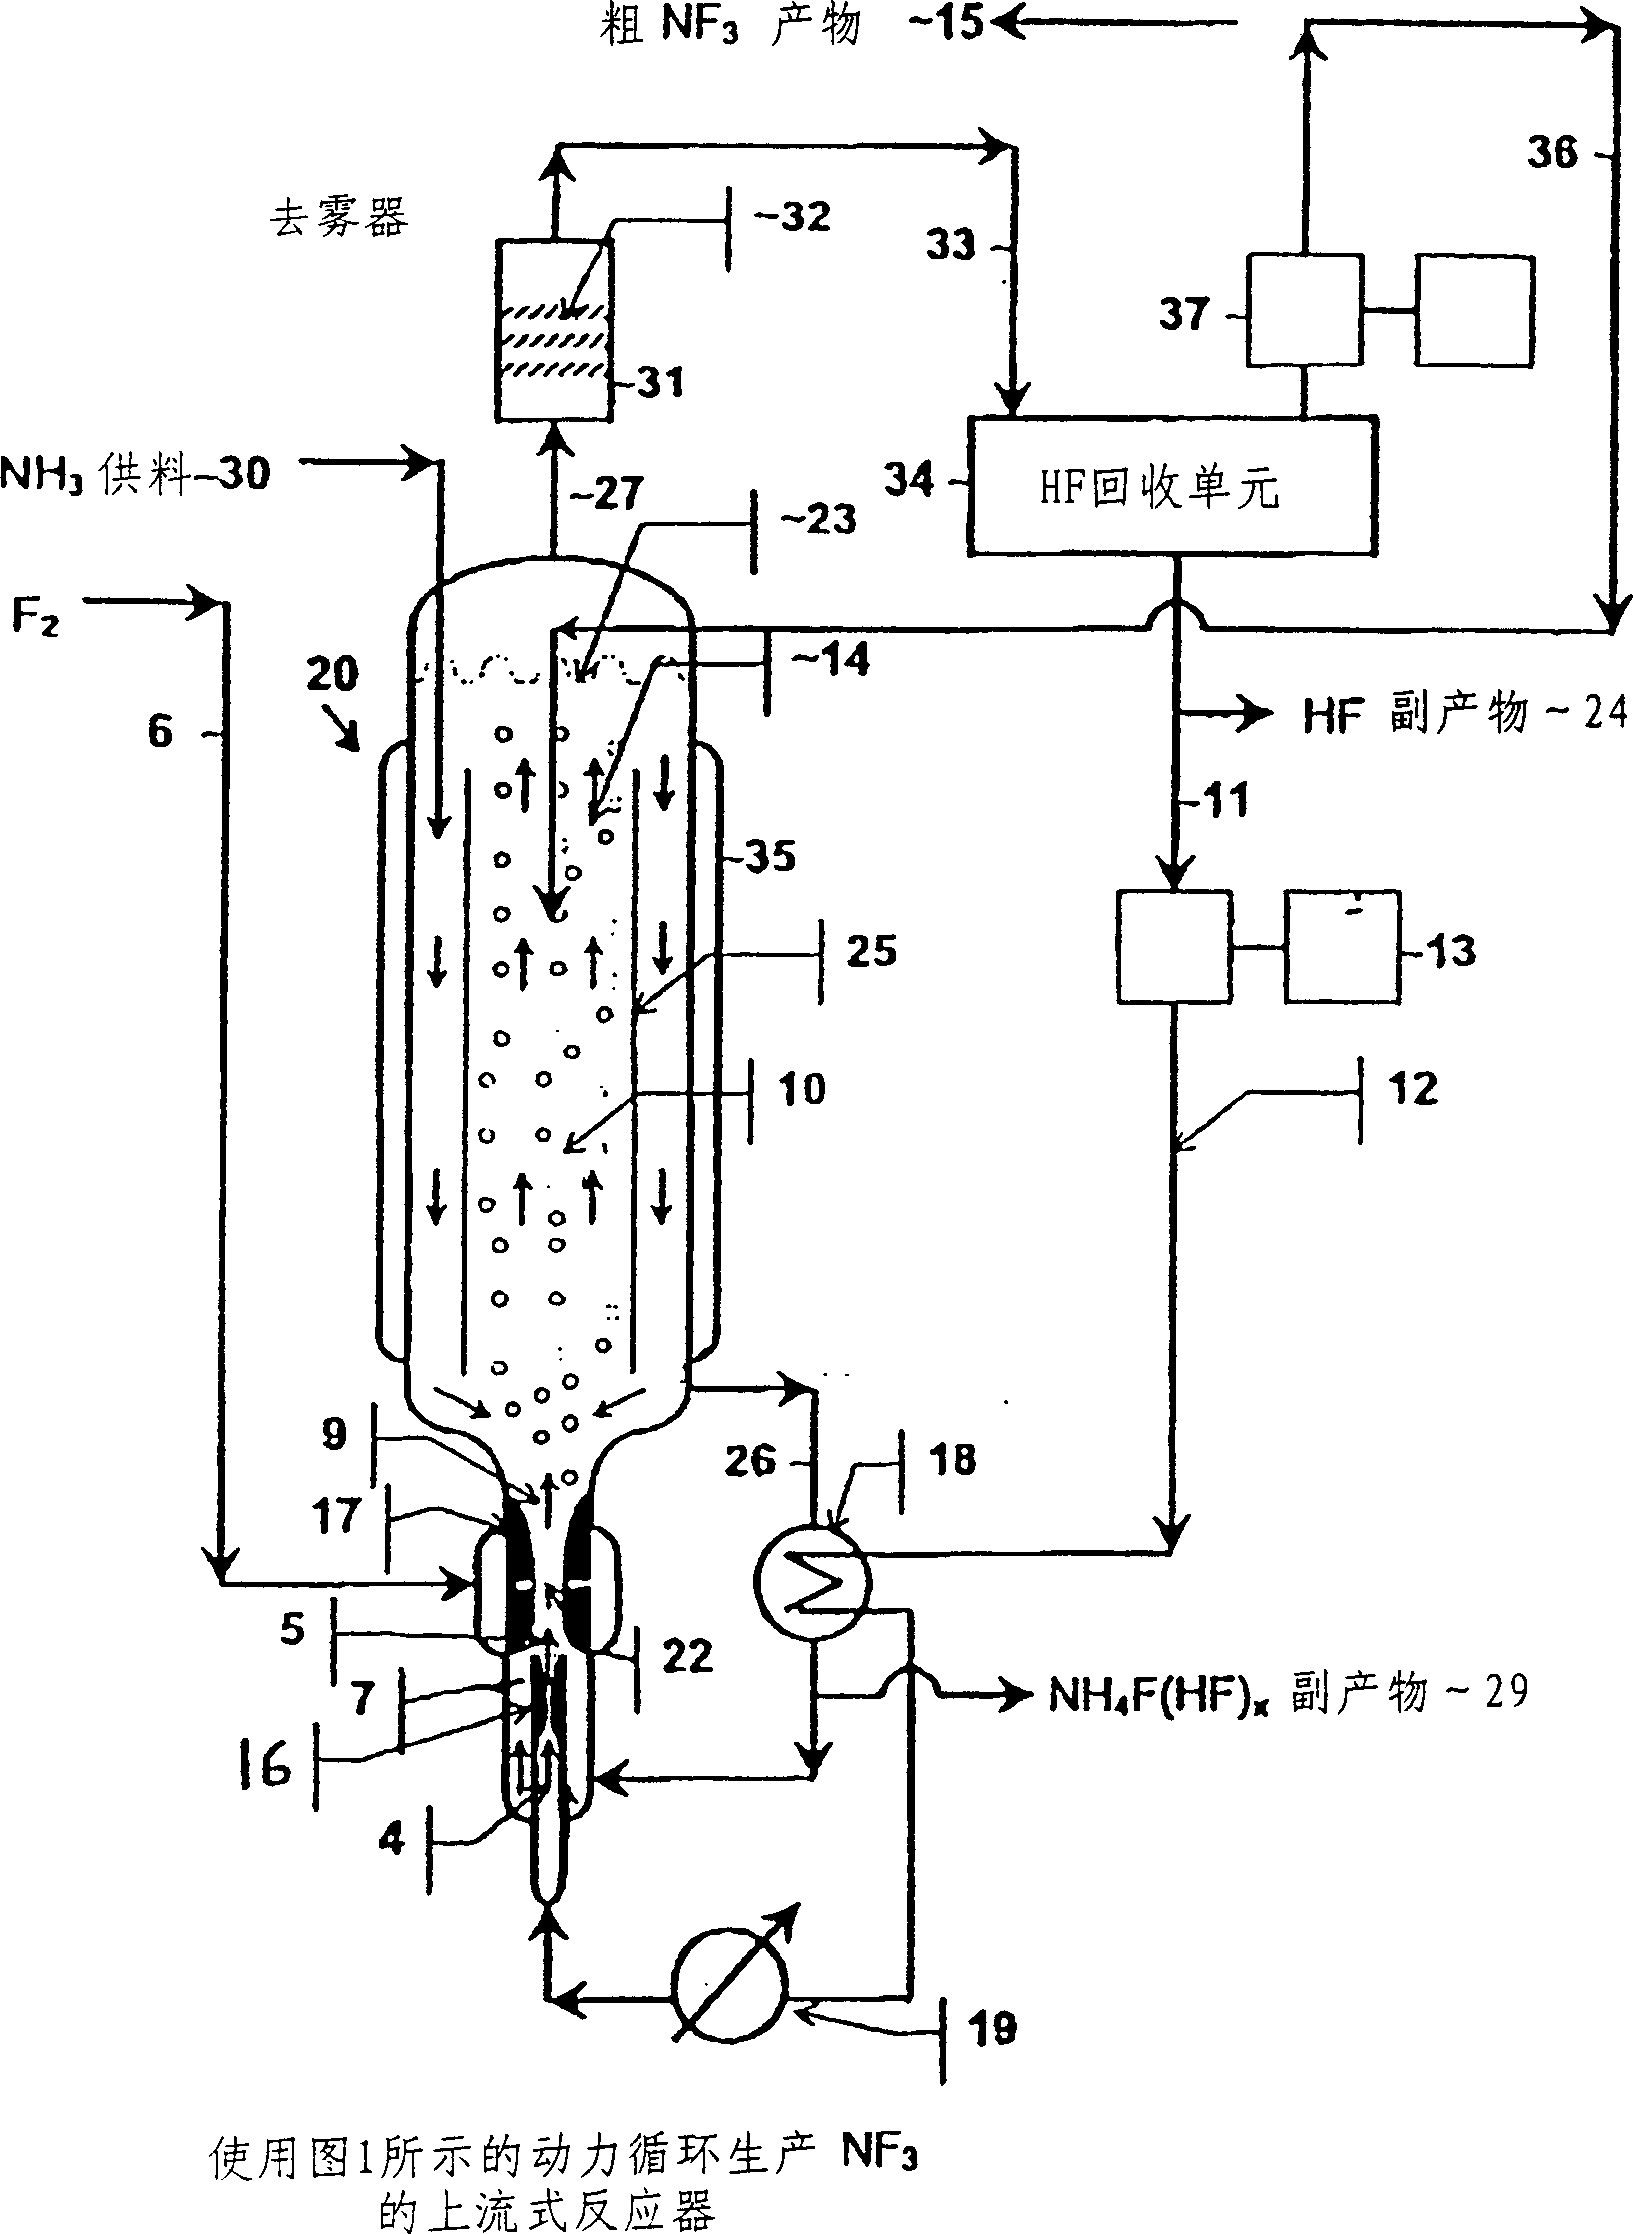 Method and apparatus for producing nitrogen trifluoride